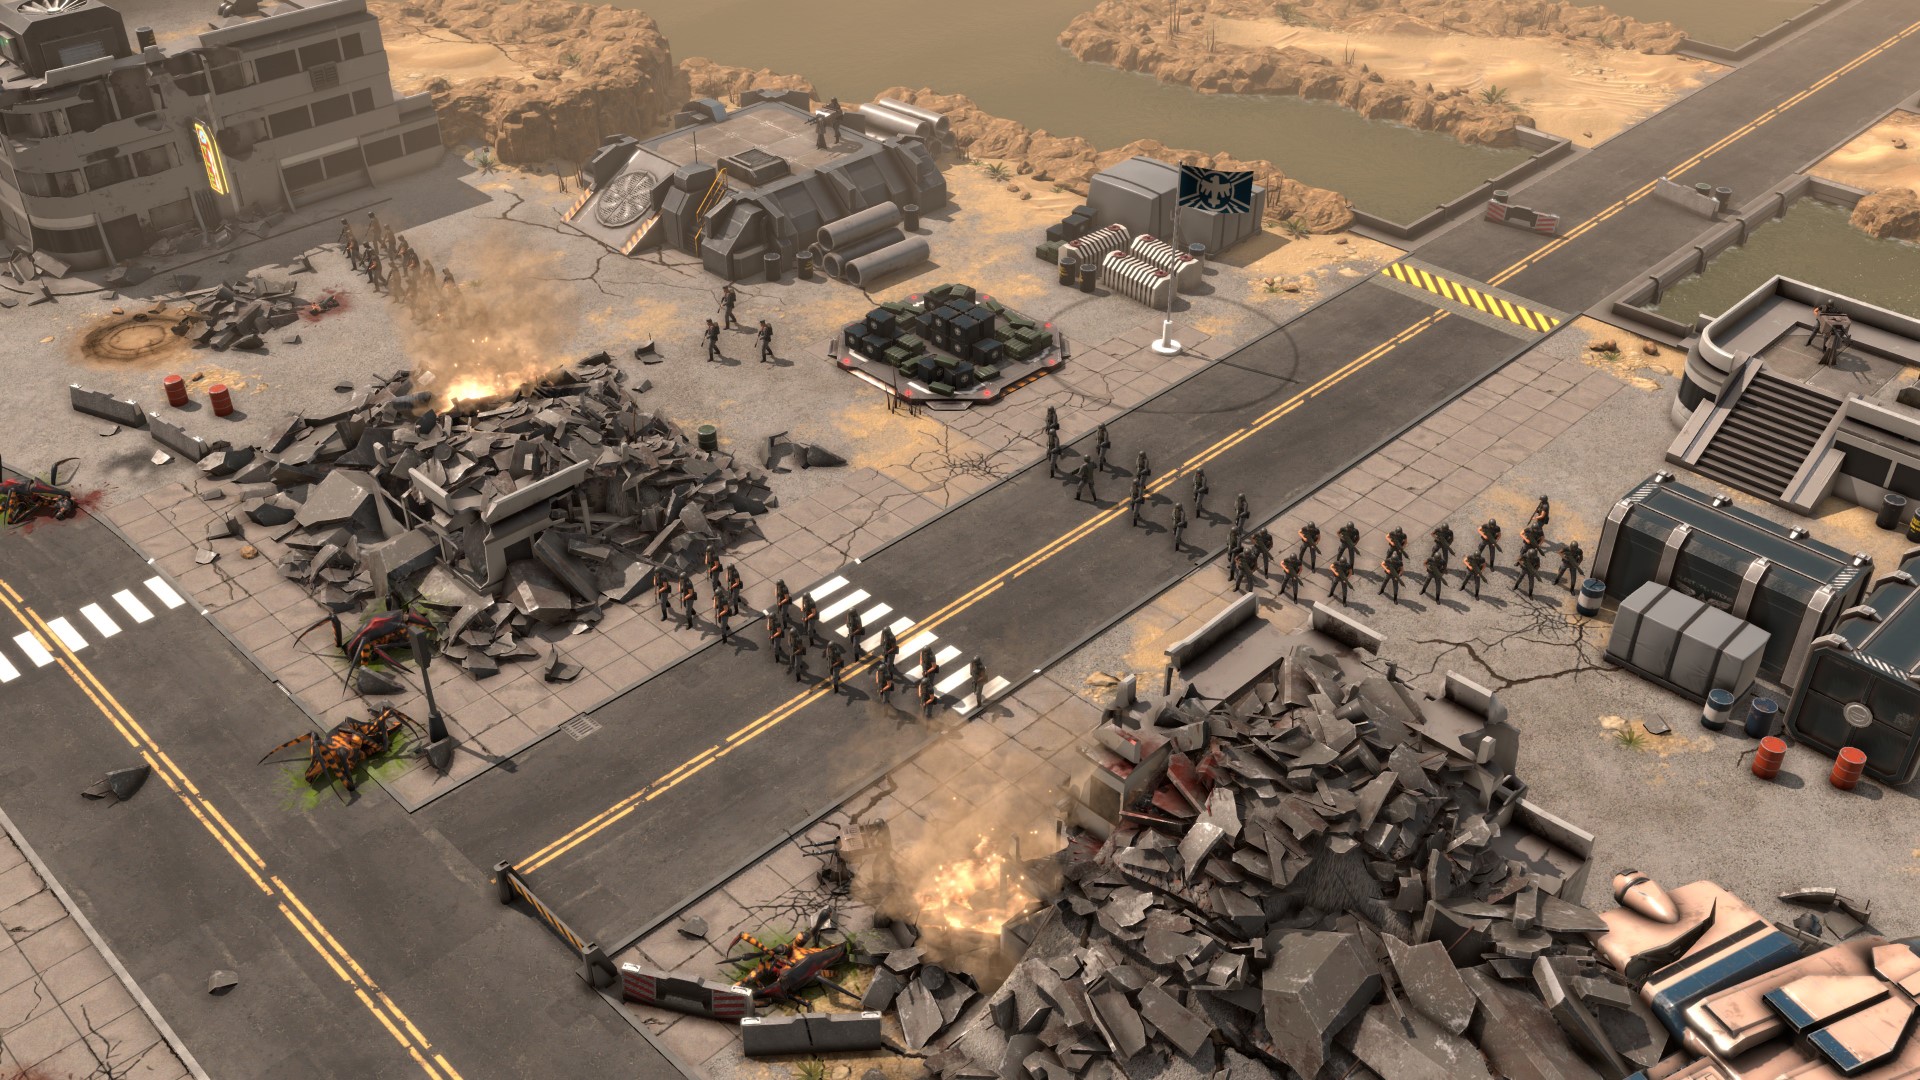 Starship Troopers: Terran Command gets delayed to June